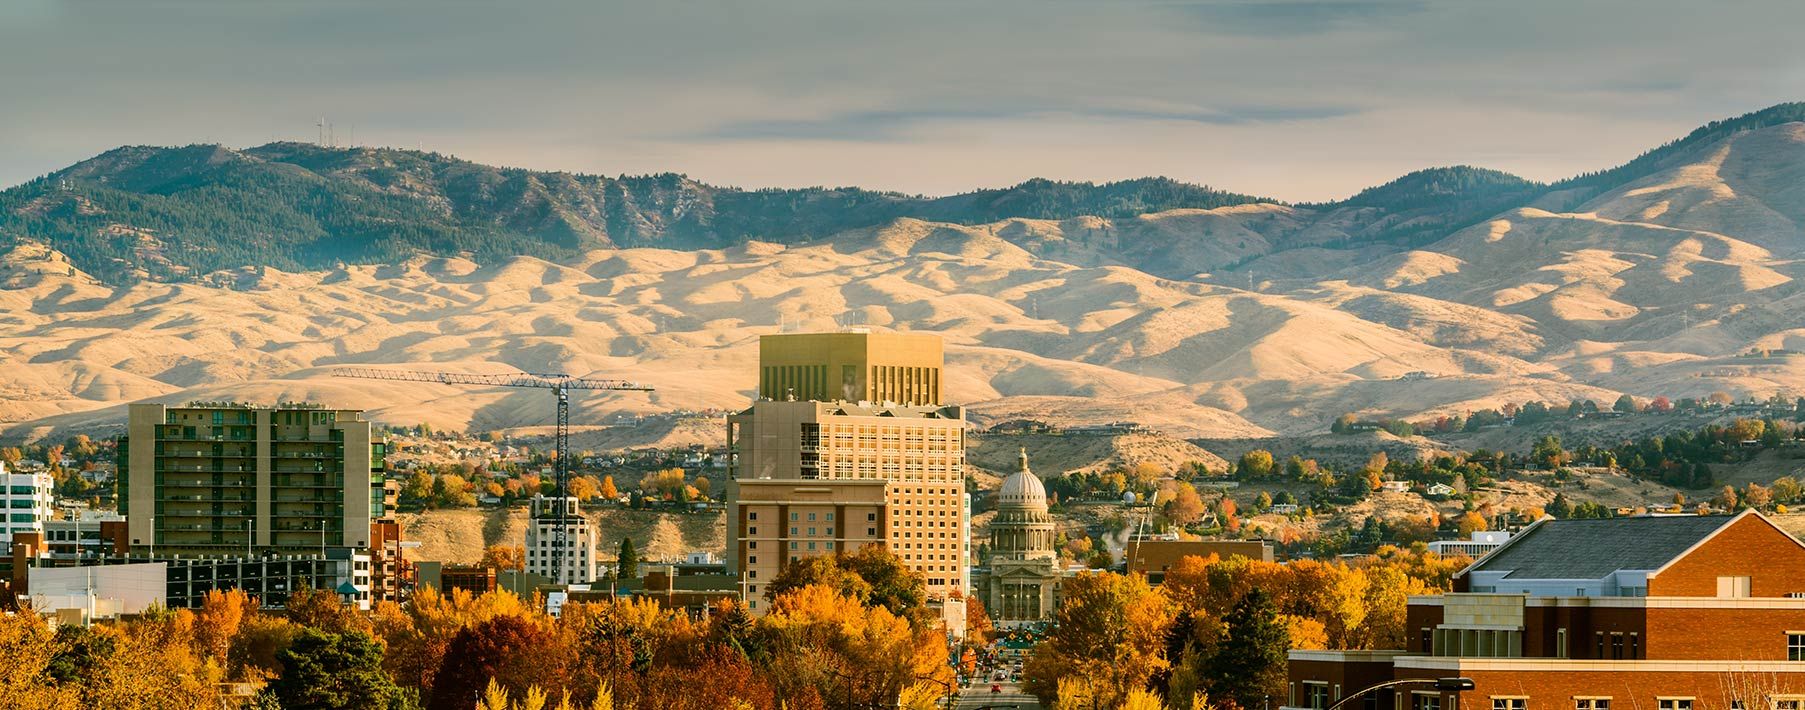 Image of a city street in Boise with fall foliage, buildings and mountains in the background